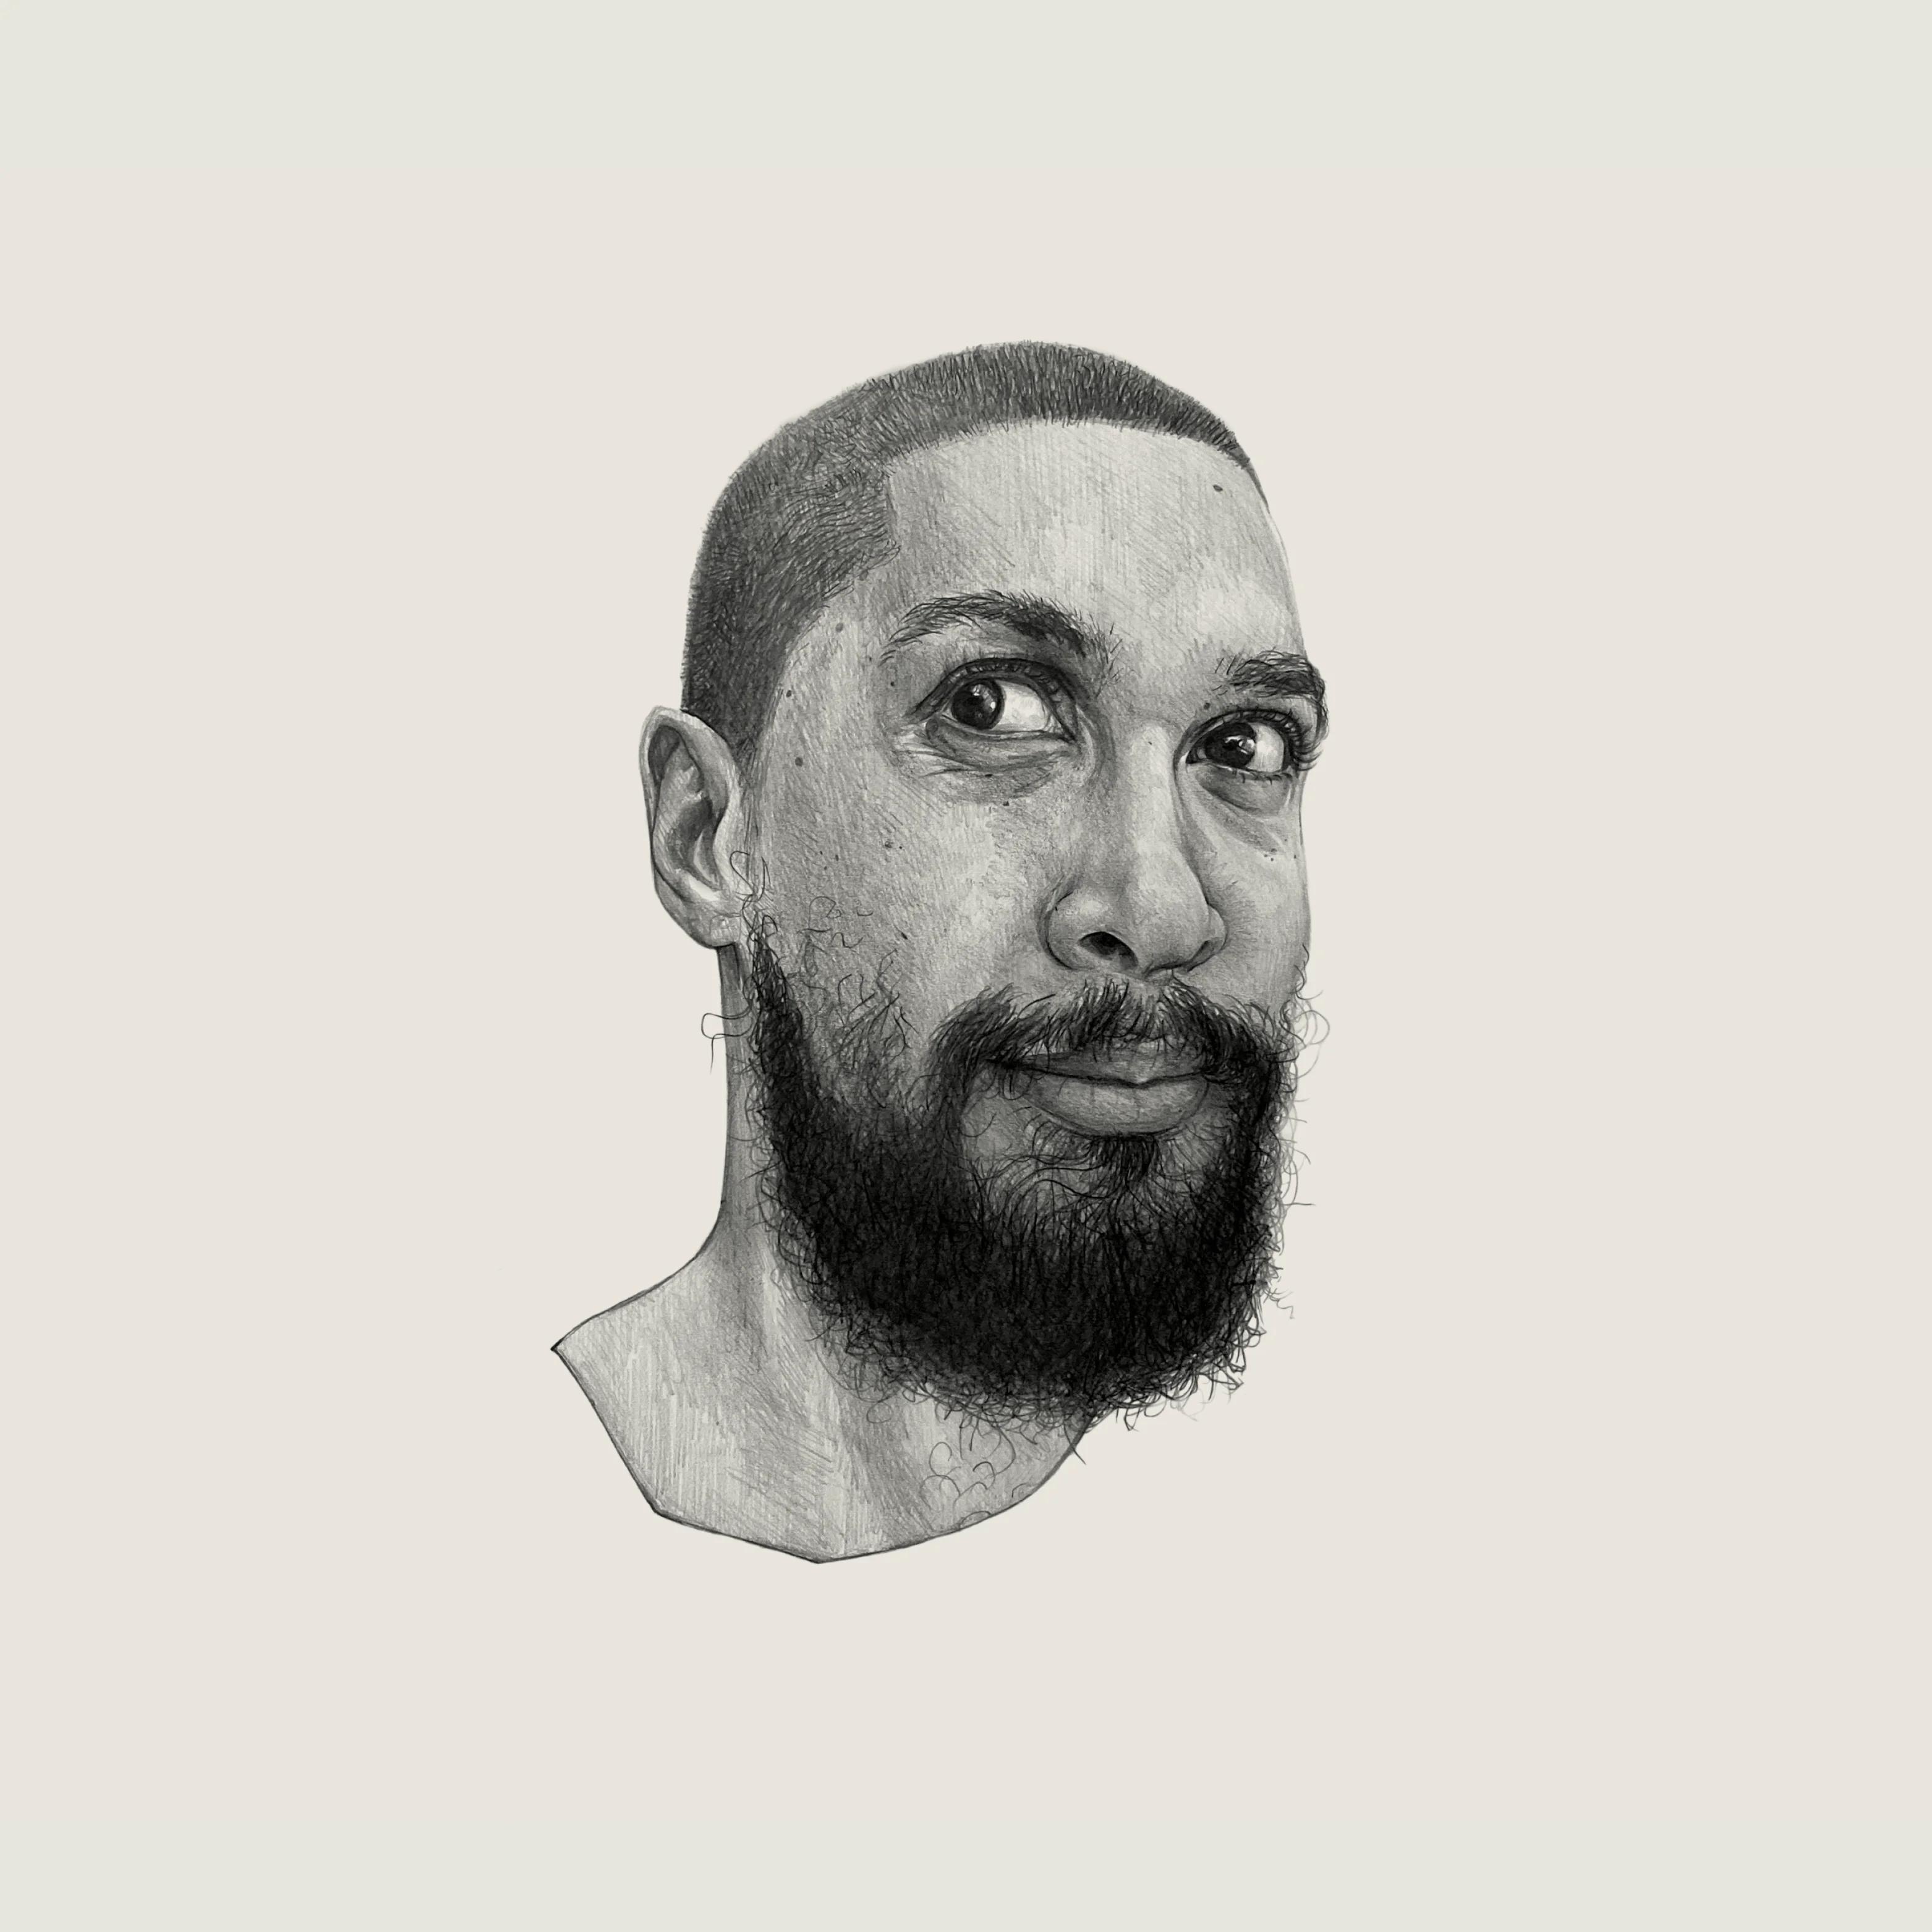 Black and white sketch of Errol with a beard, as he looks slightly away